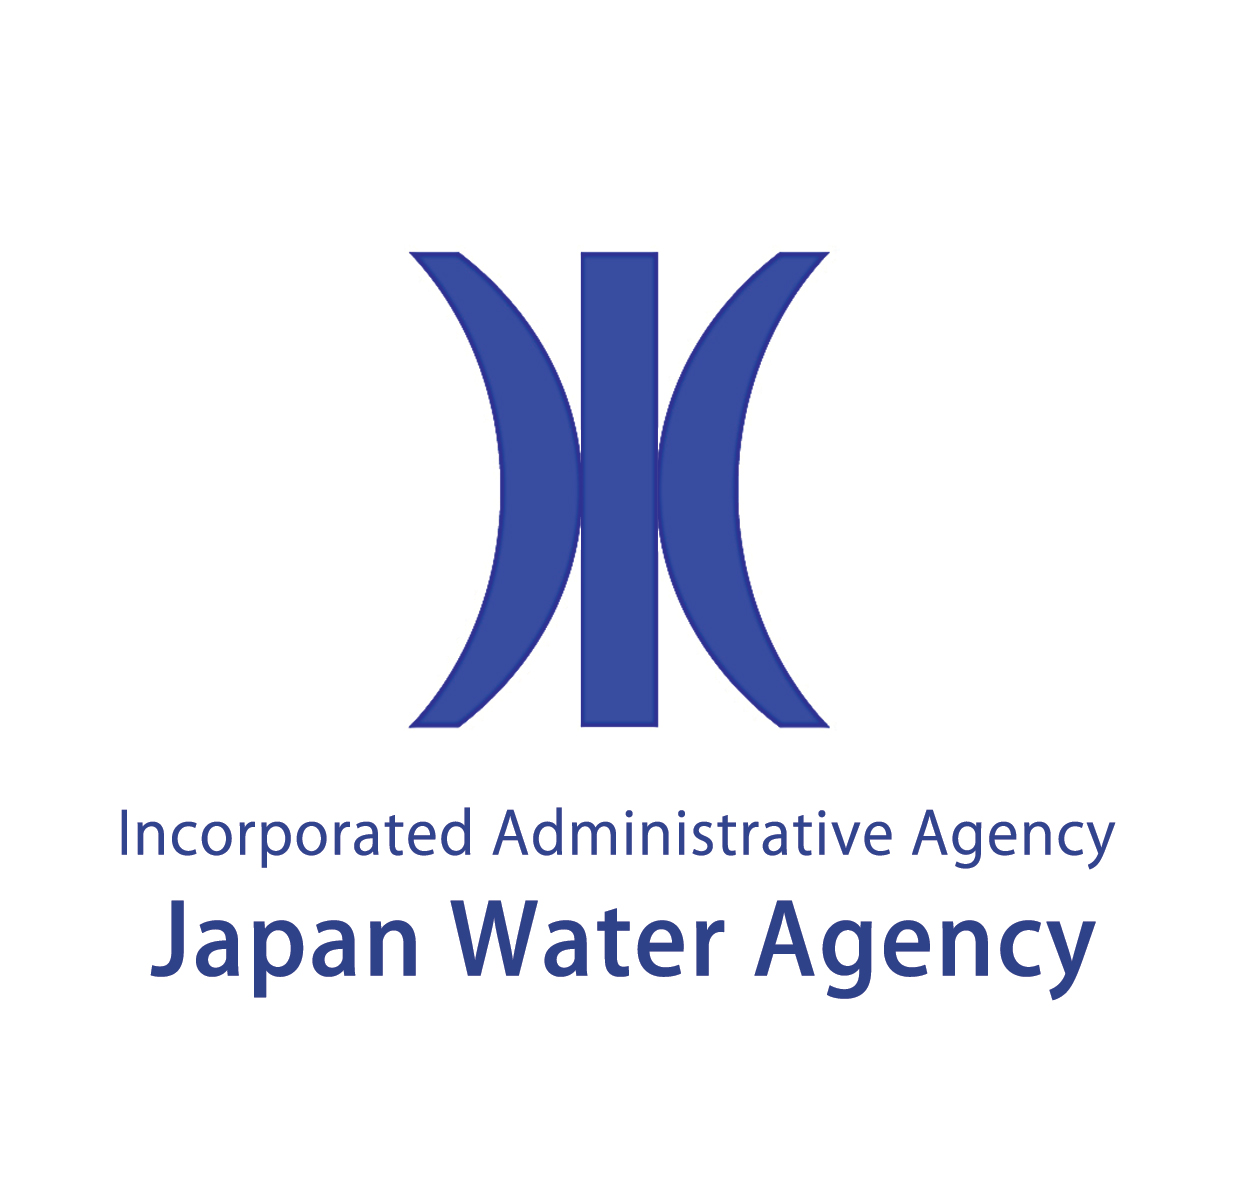 Incorporated Administrative Agency Japan Water Agency